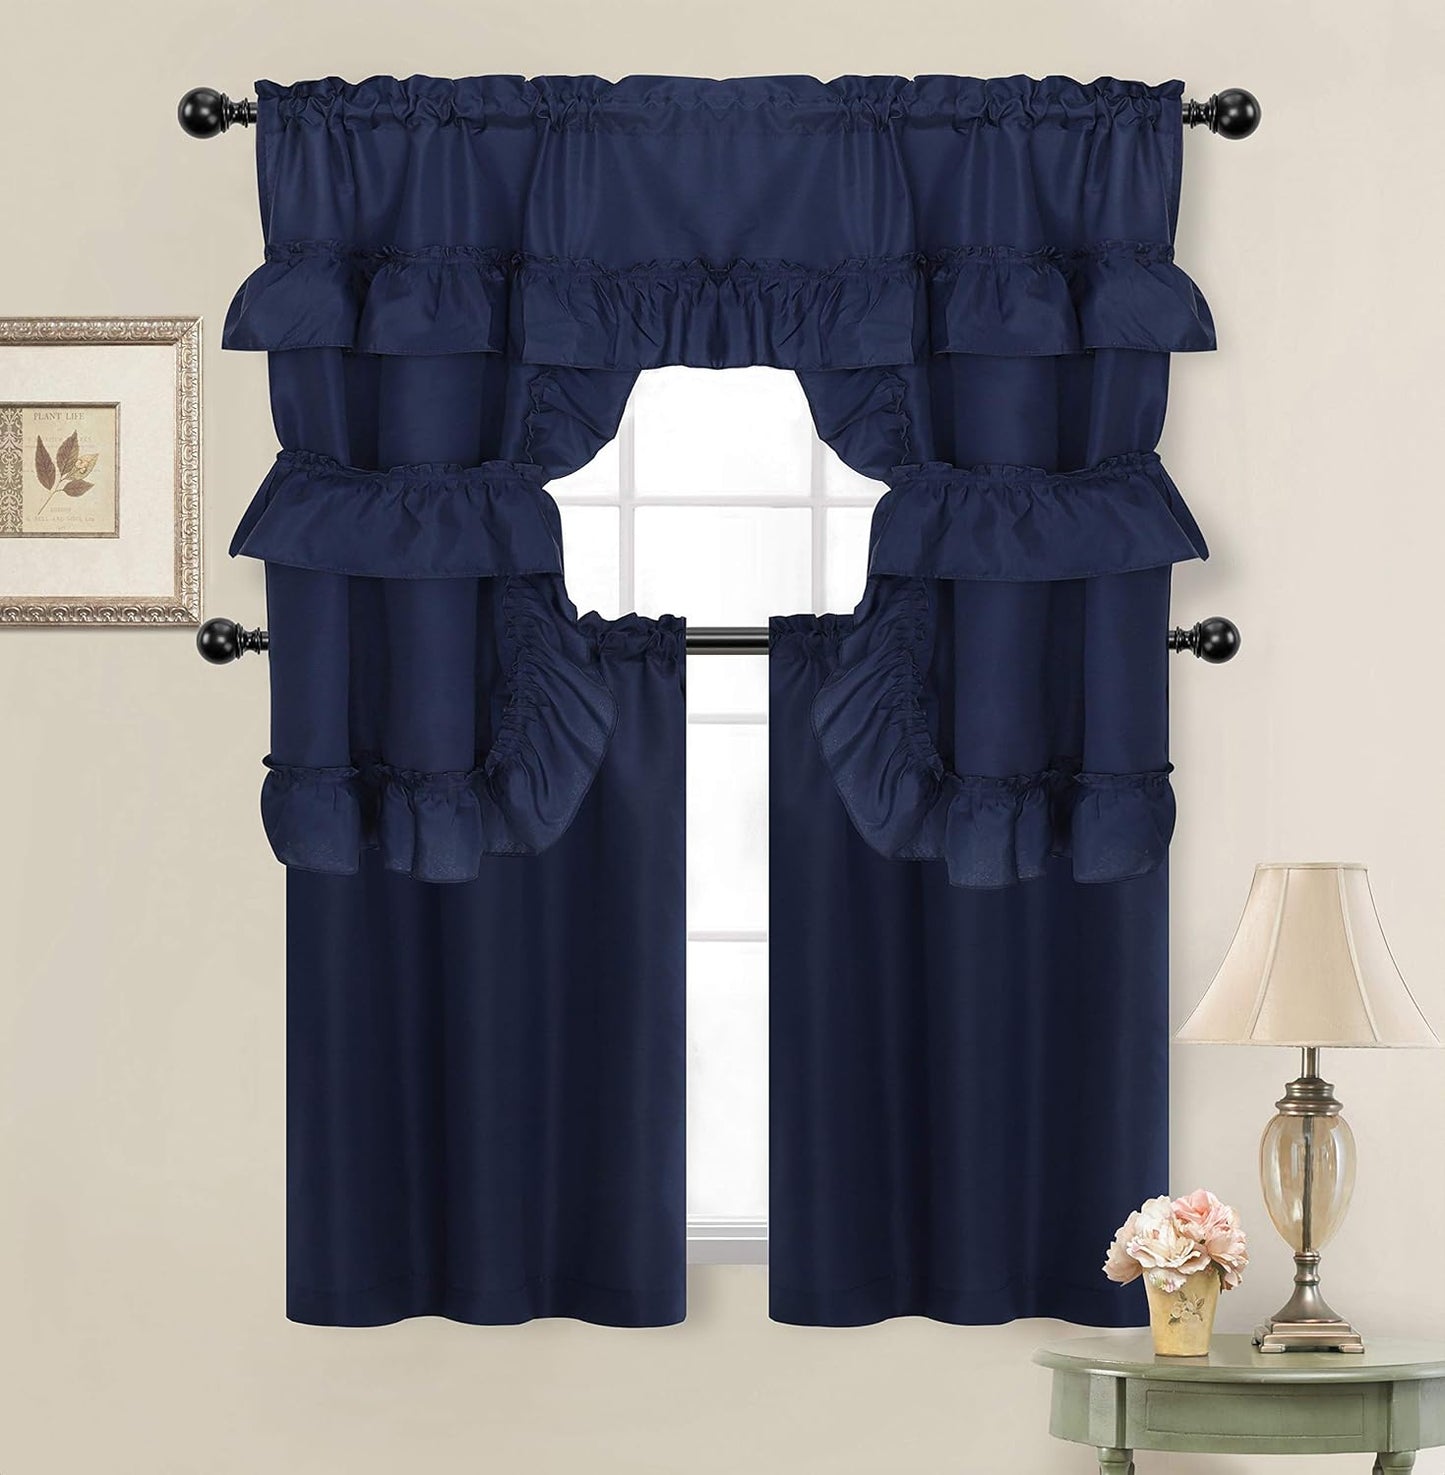 Goodgram Country Farmhouse Living Solid Colored Cafe Kitchen Curtain Tier & Swag Valance Set - Assorted Colors (White)  GoodGram Navy  